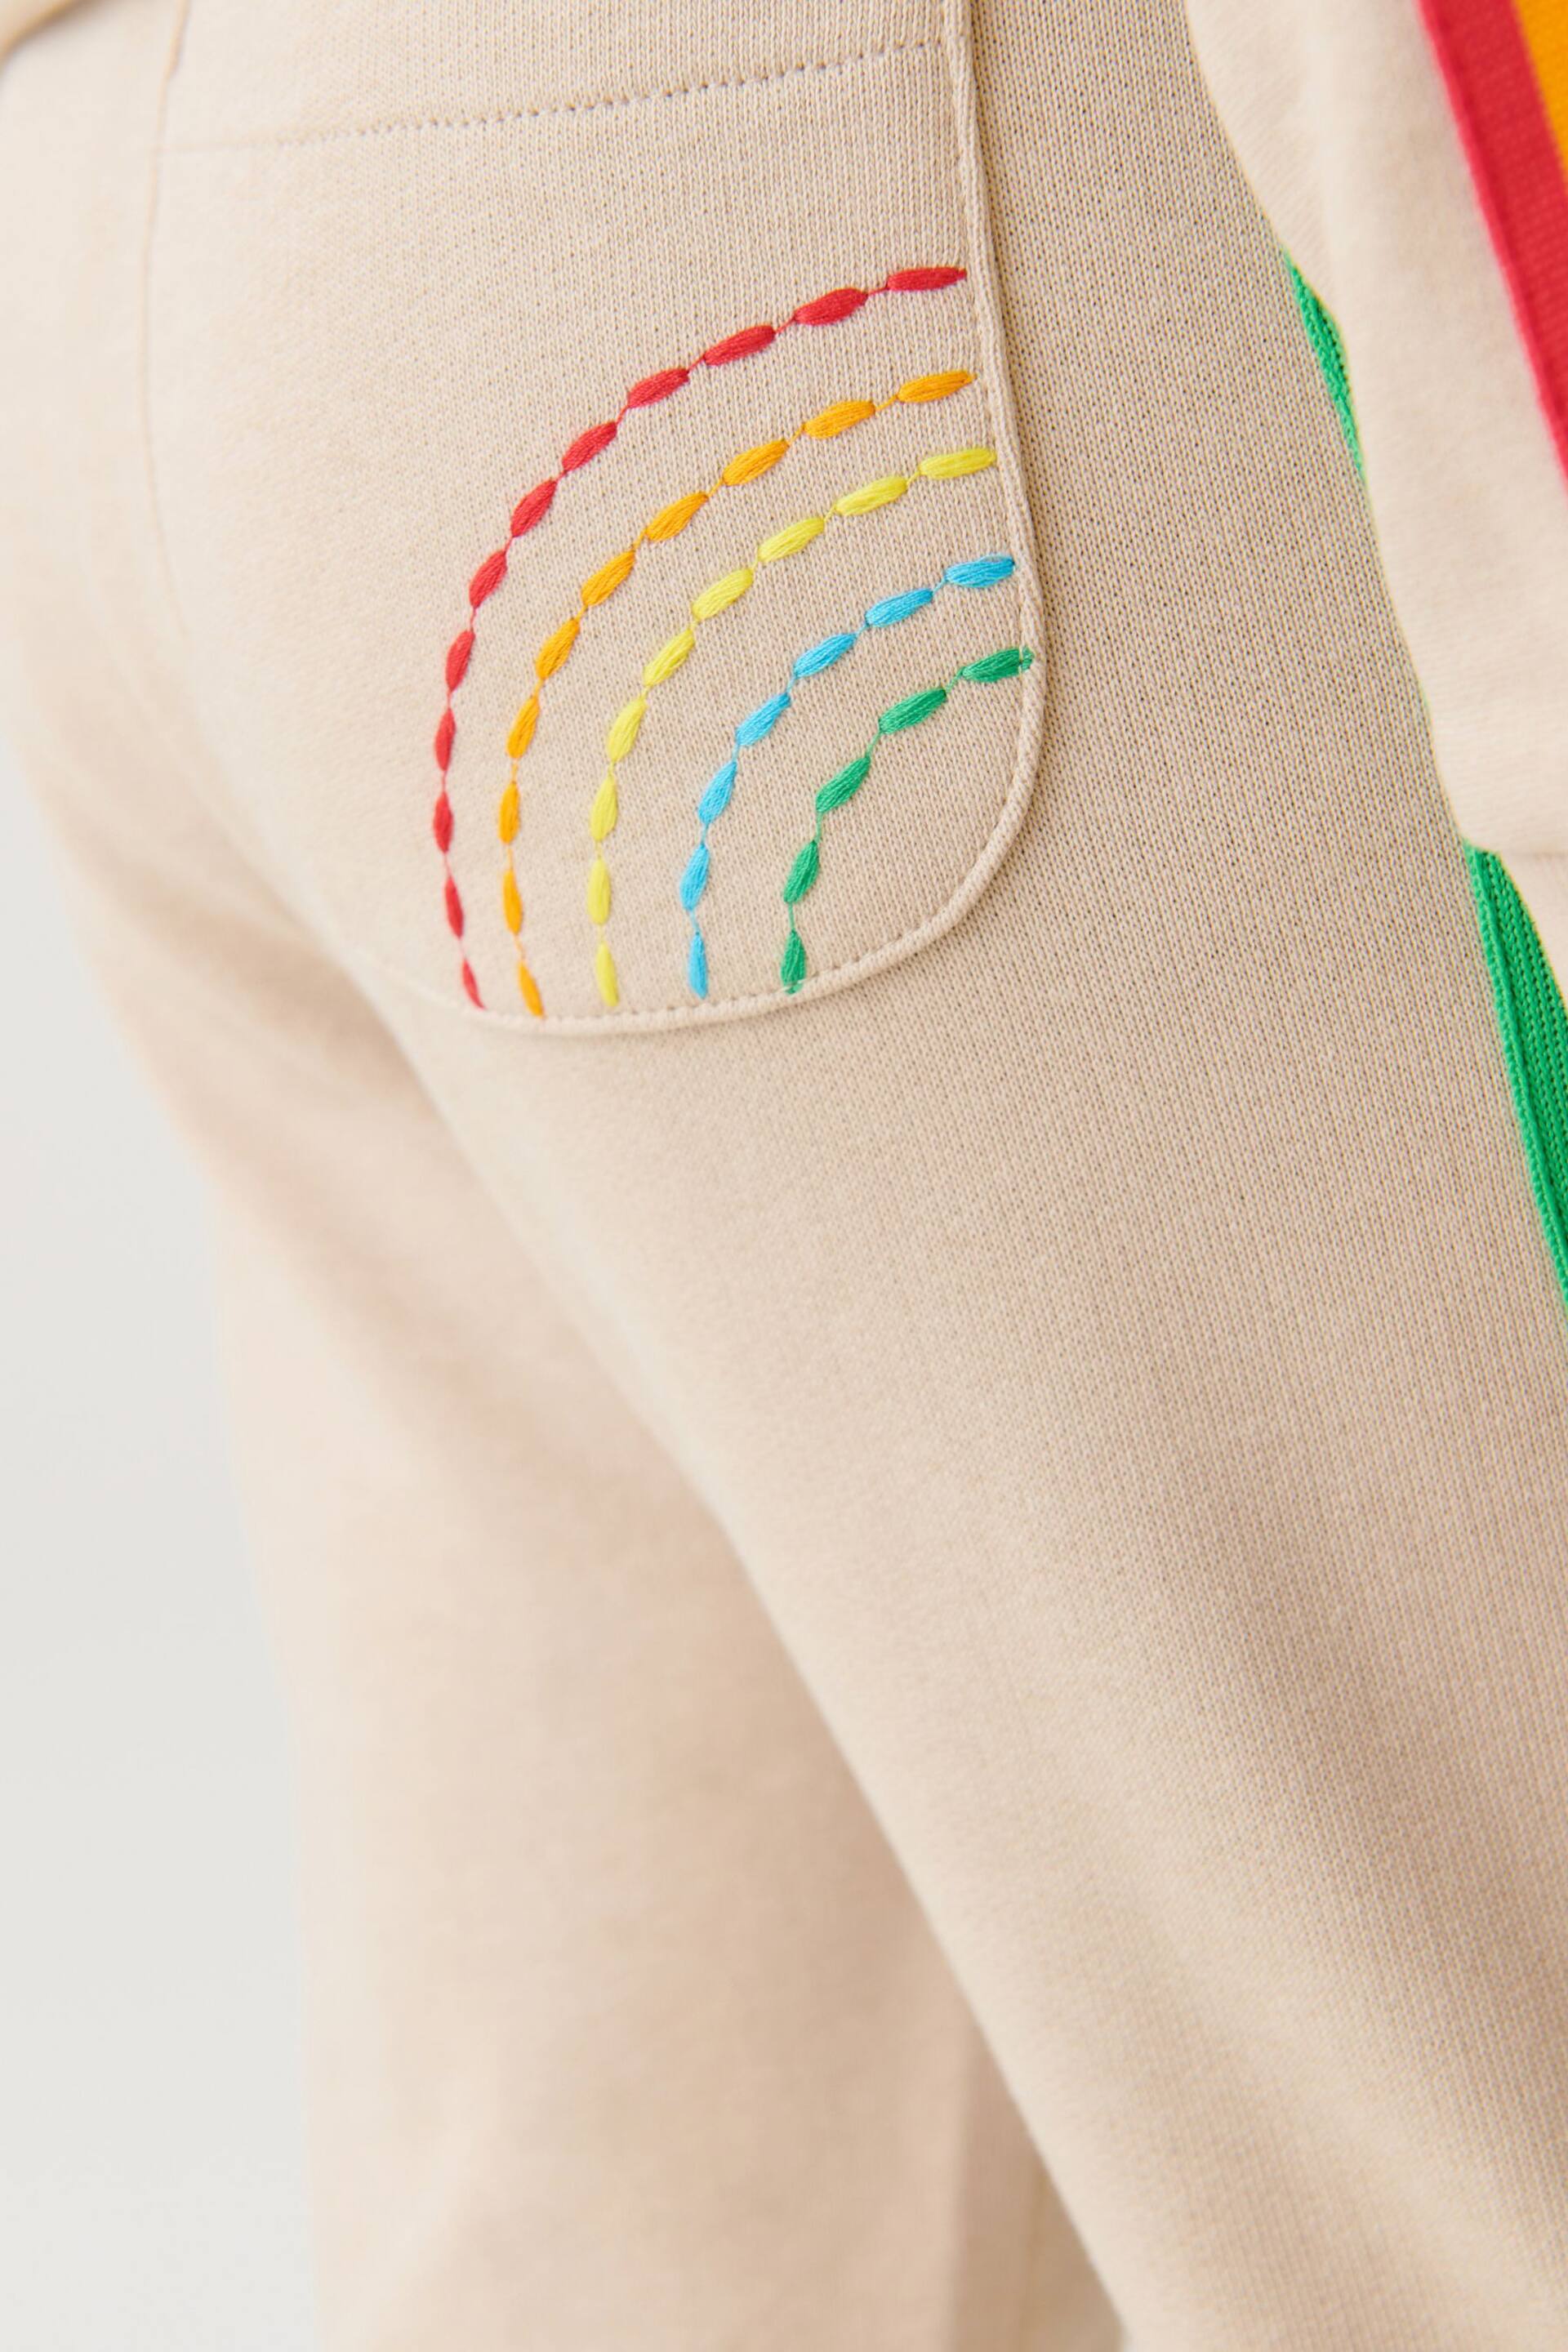 Little Bird by Jools Oliver Stone Rainbow Striped Joggers - Image 5 of 9